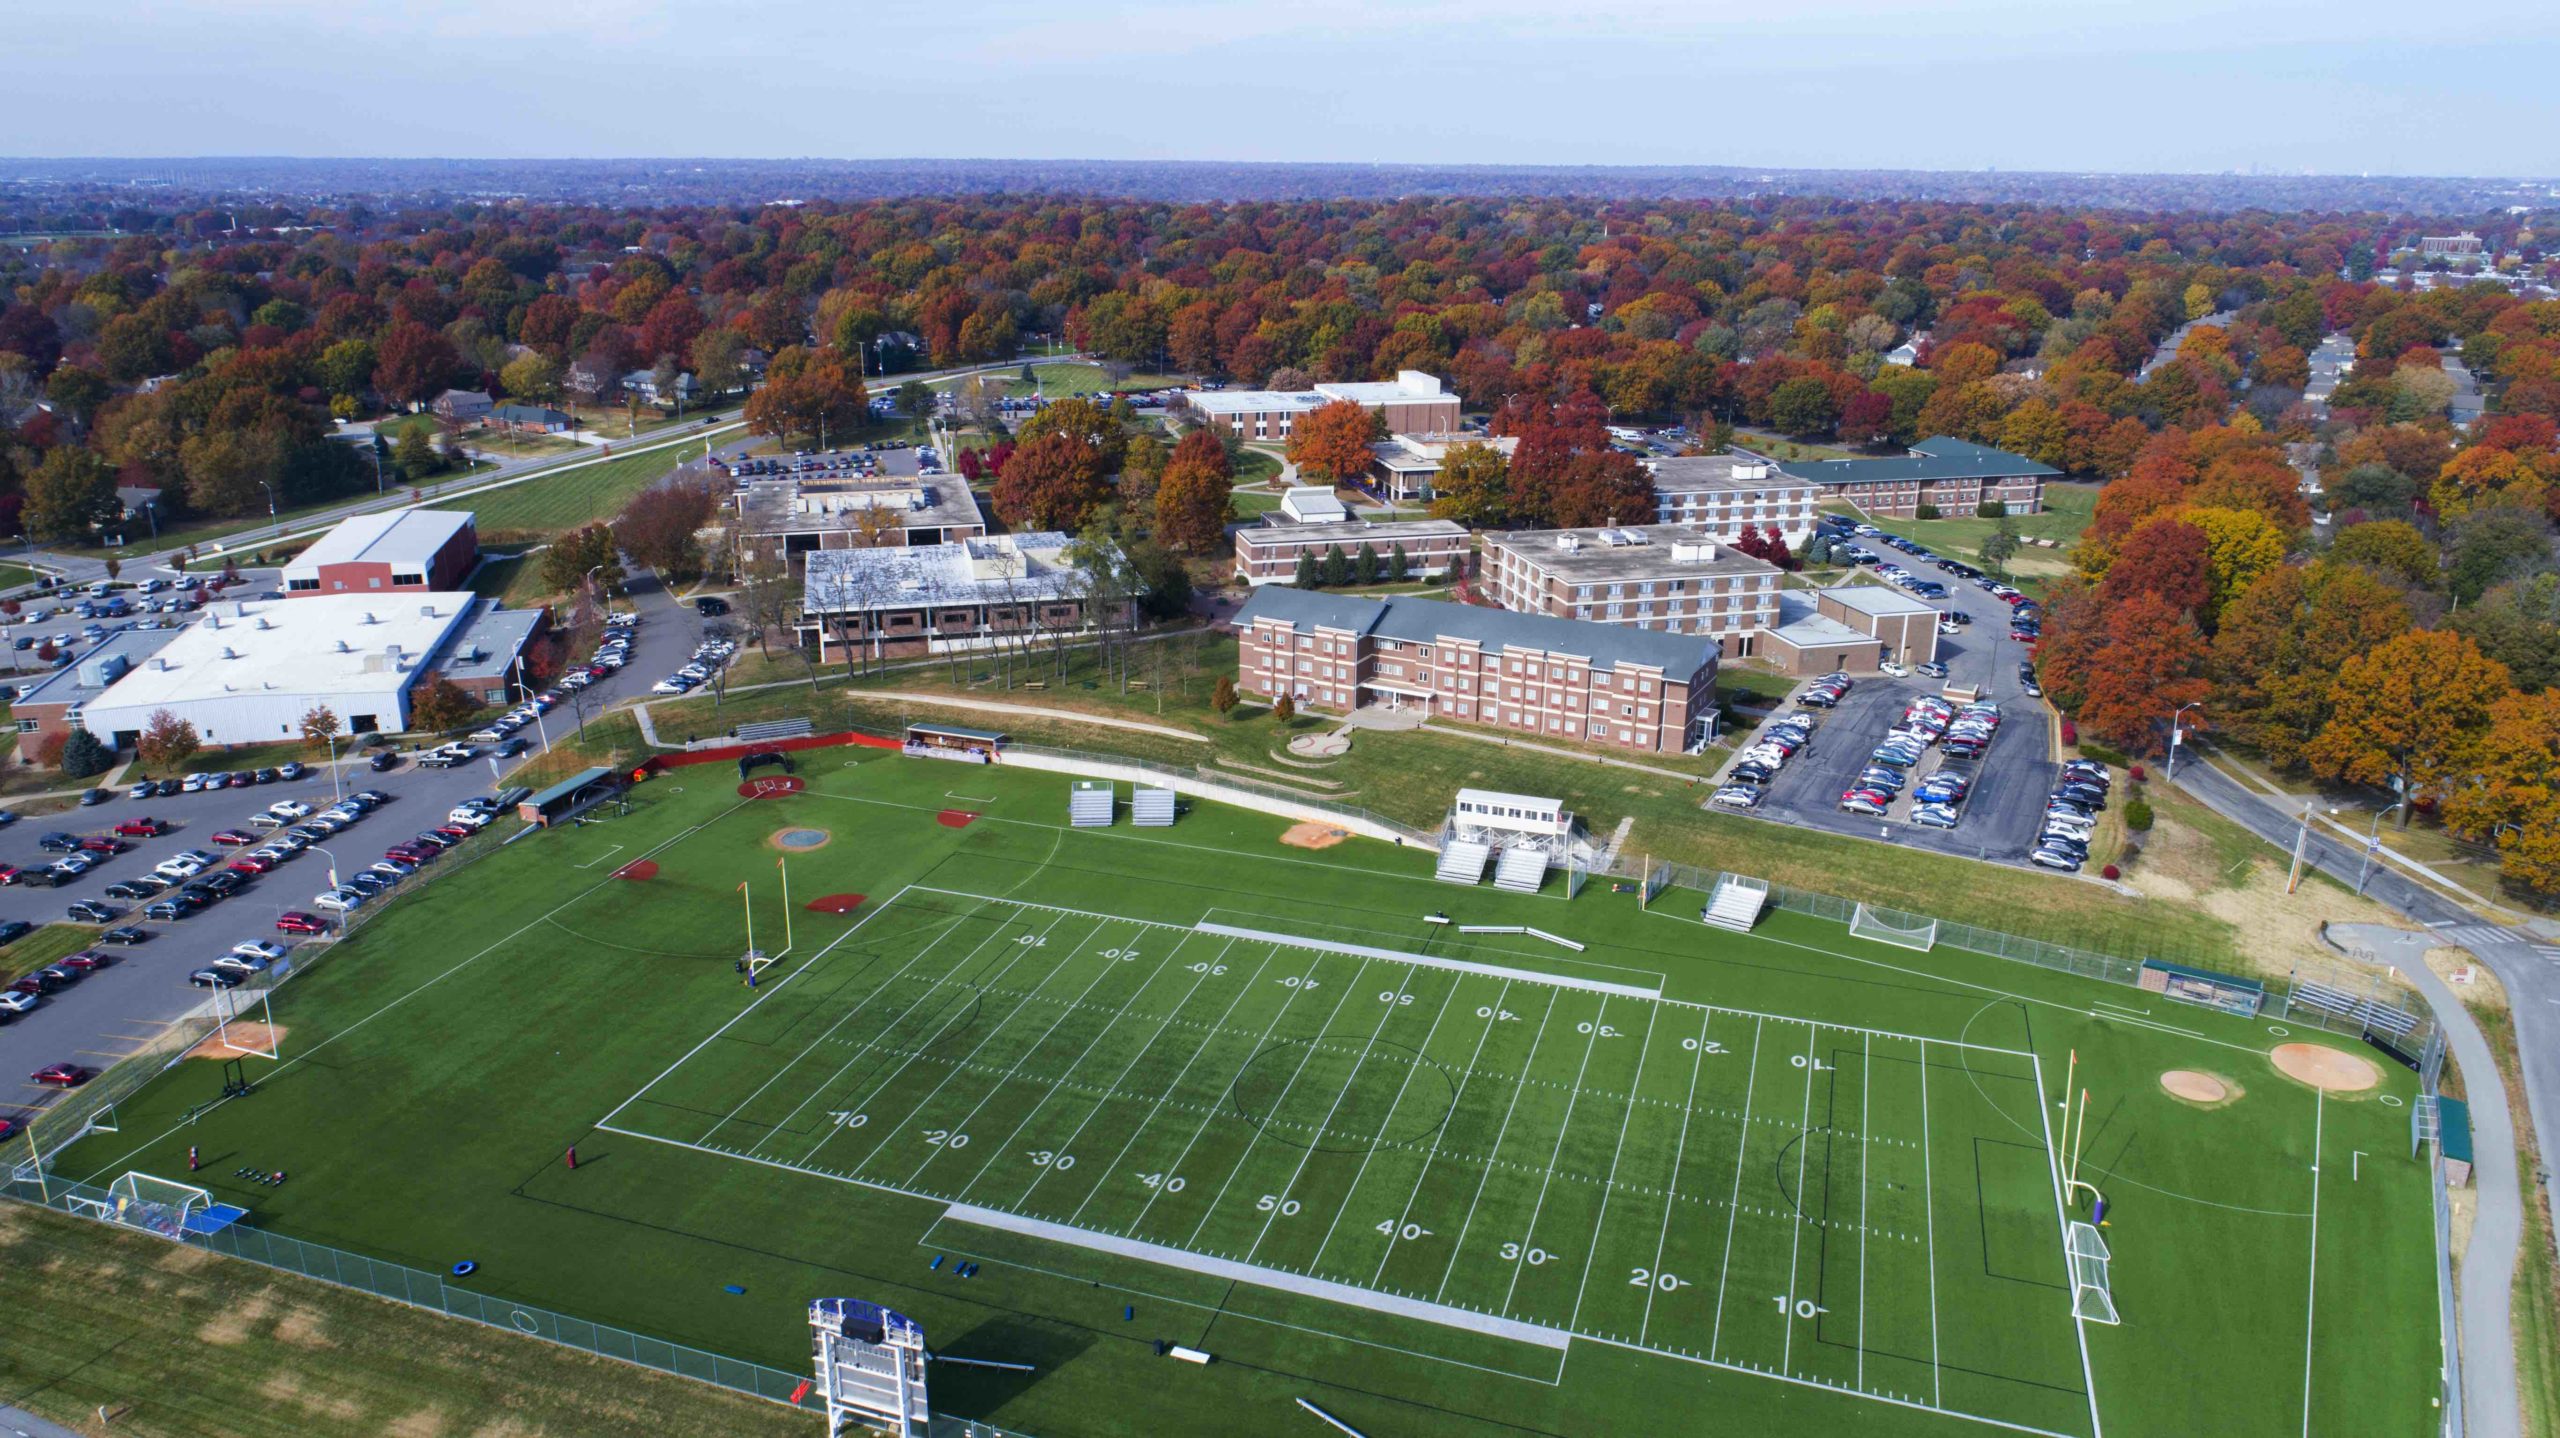 Aerial view of campus from southside looking north. Zarda multi-sport field is in the foreground.